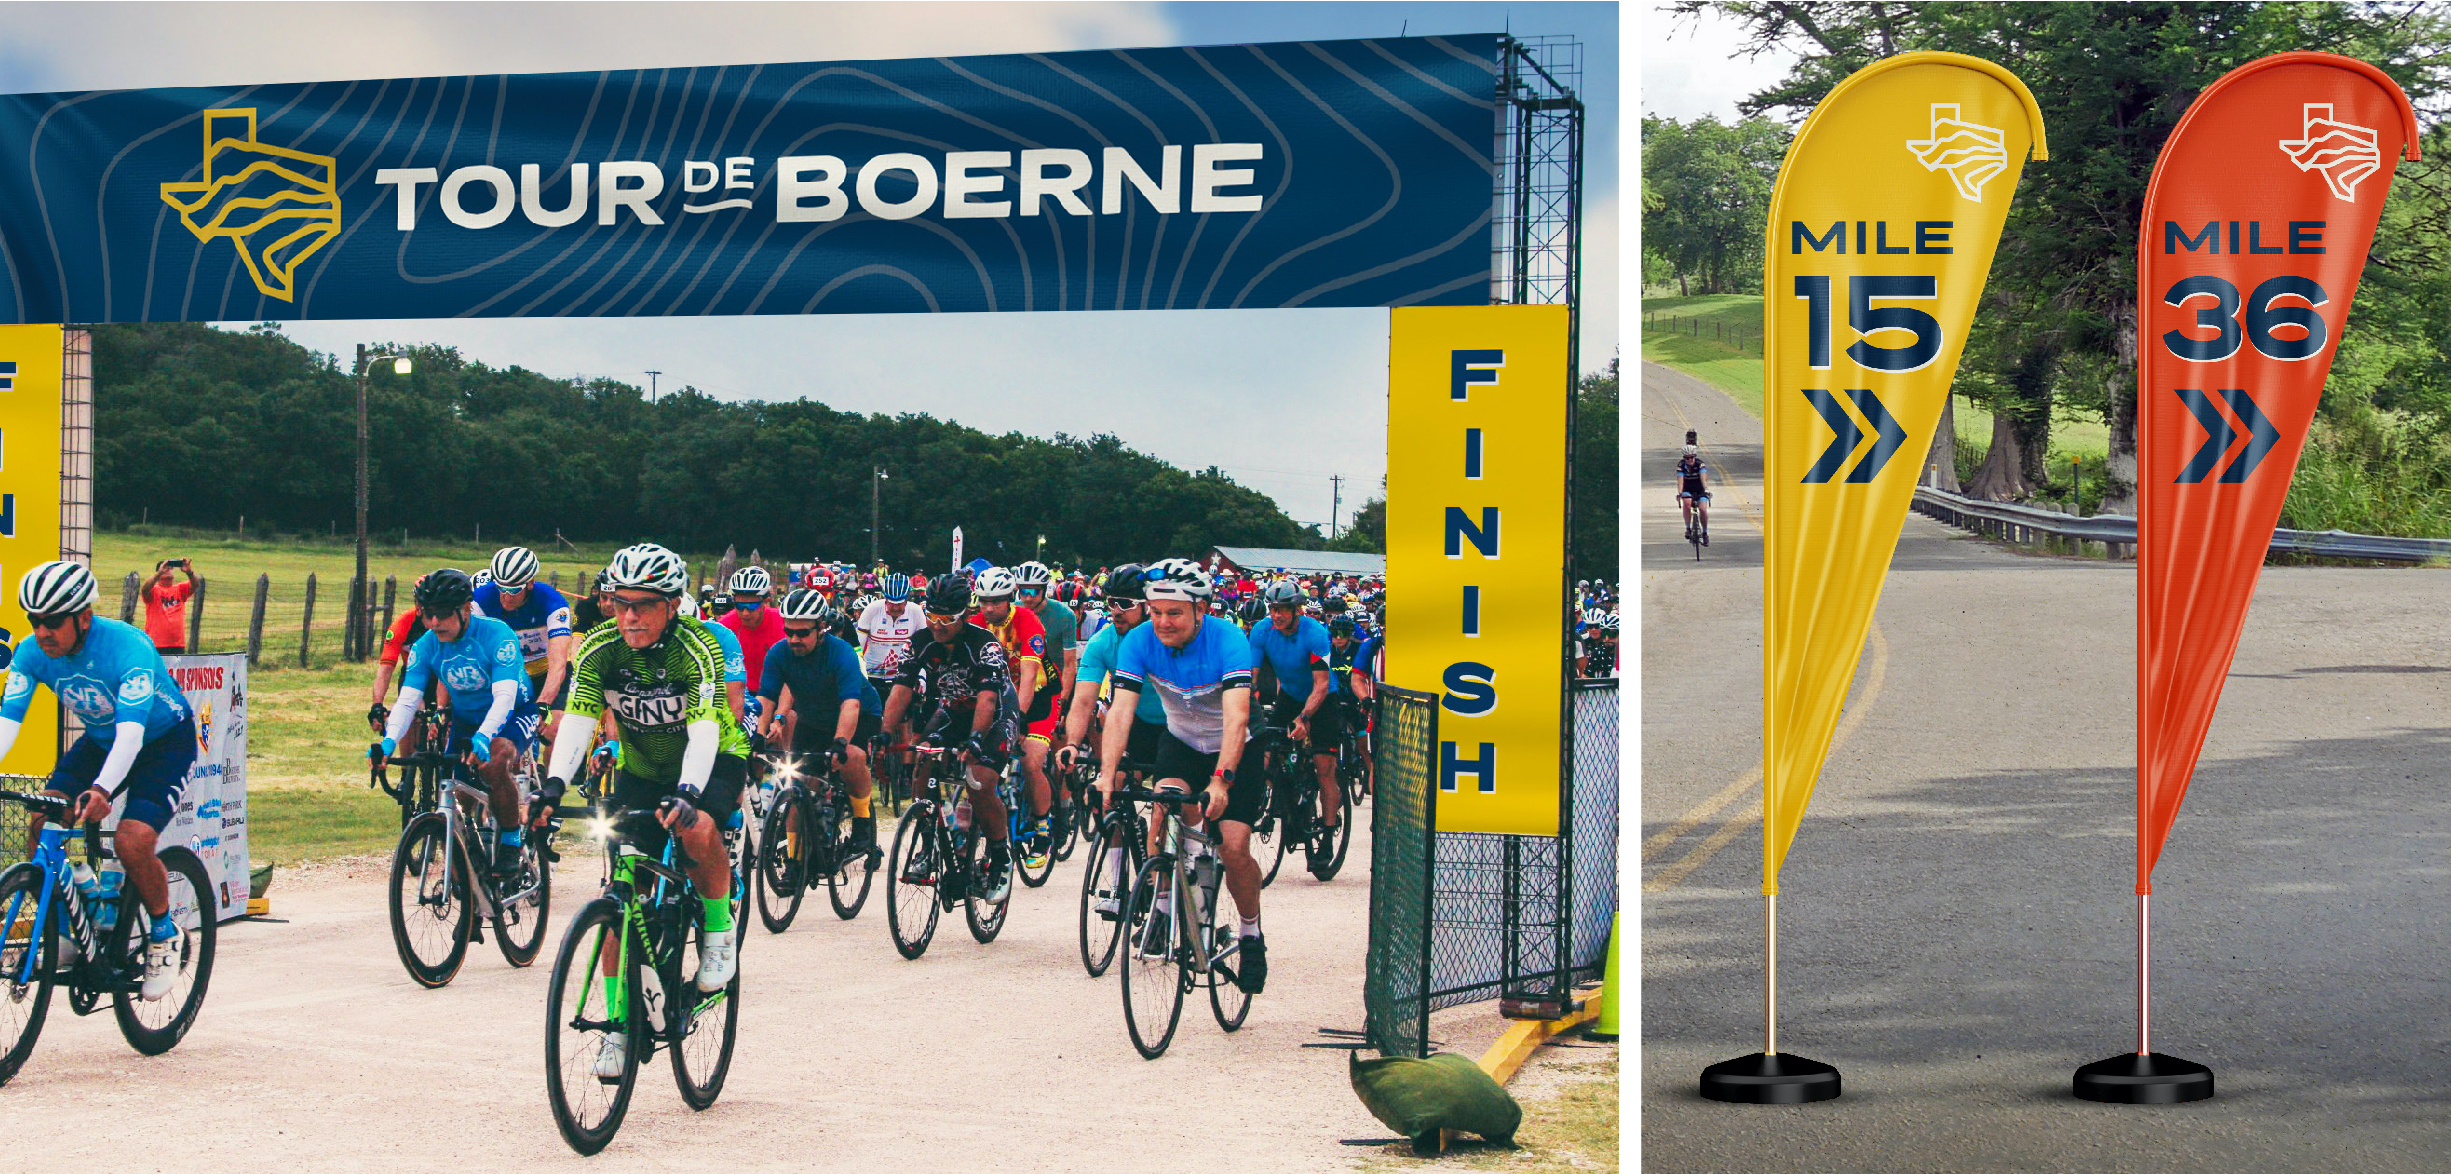 Showing the Tour de Boerne finish line. Branding designed by MDR for this San Antonio-based organization.